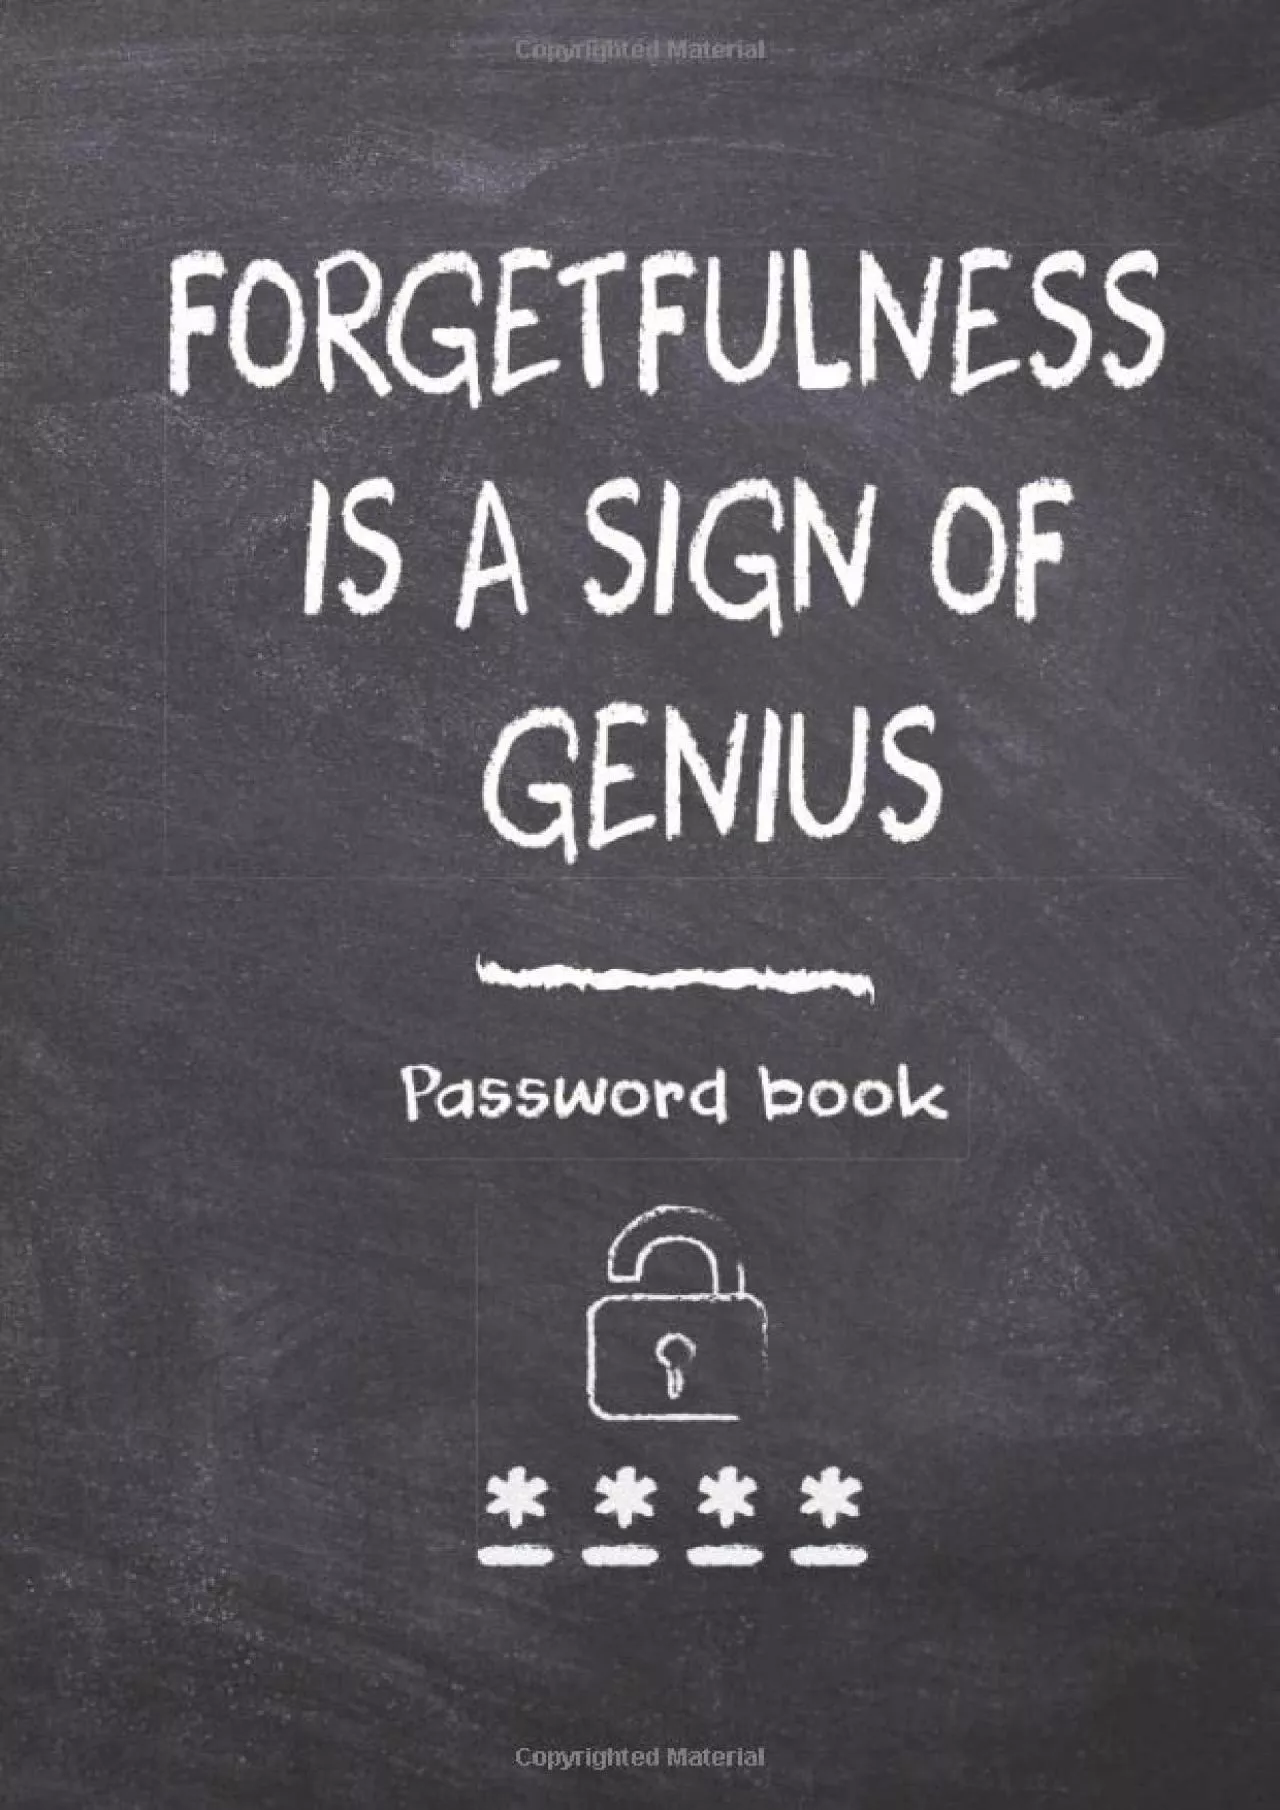 [BEST]-Forgetfulness Is A Sign Of Genius: Password book, password logbook, and internet